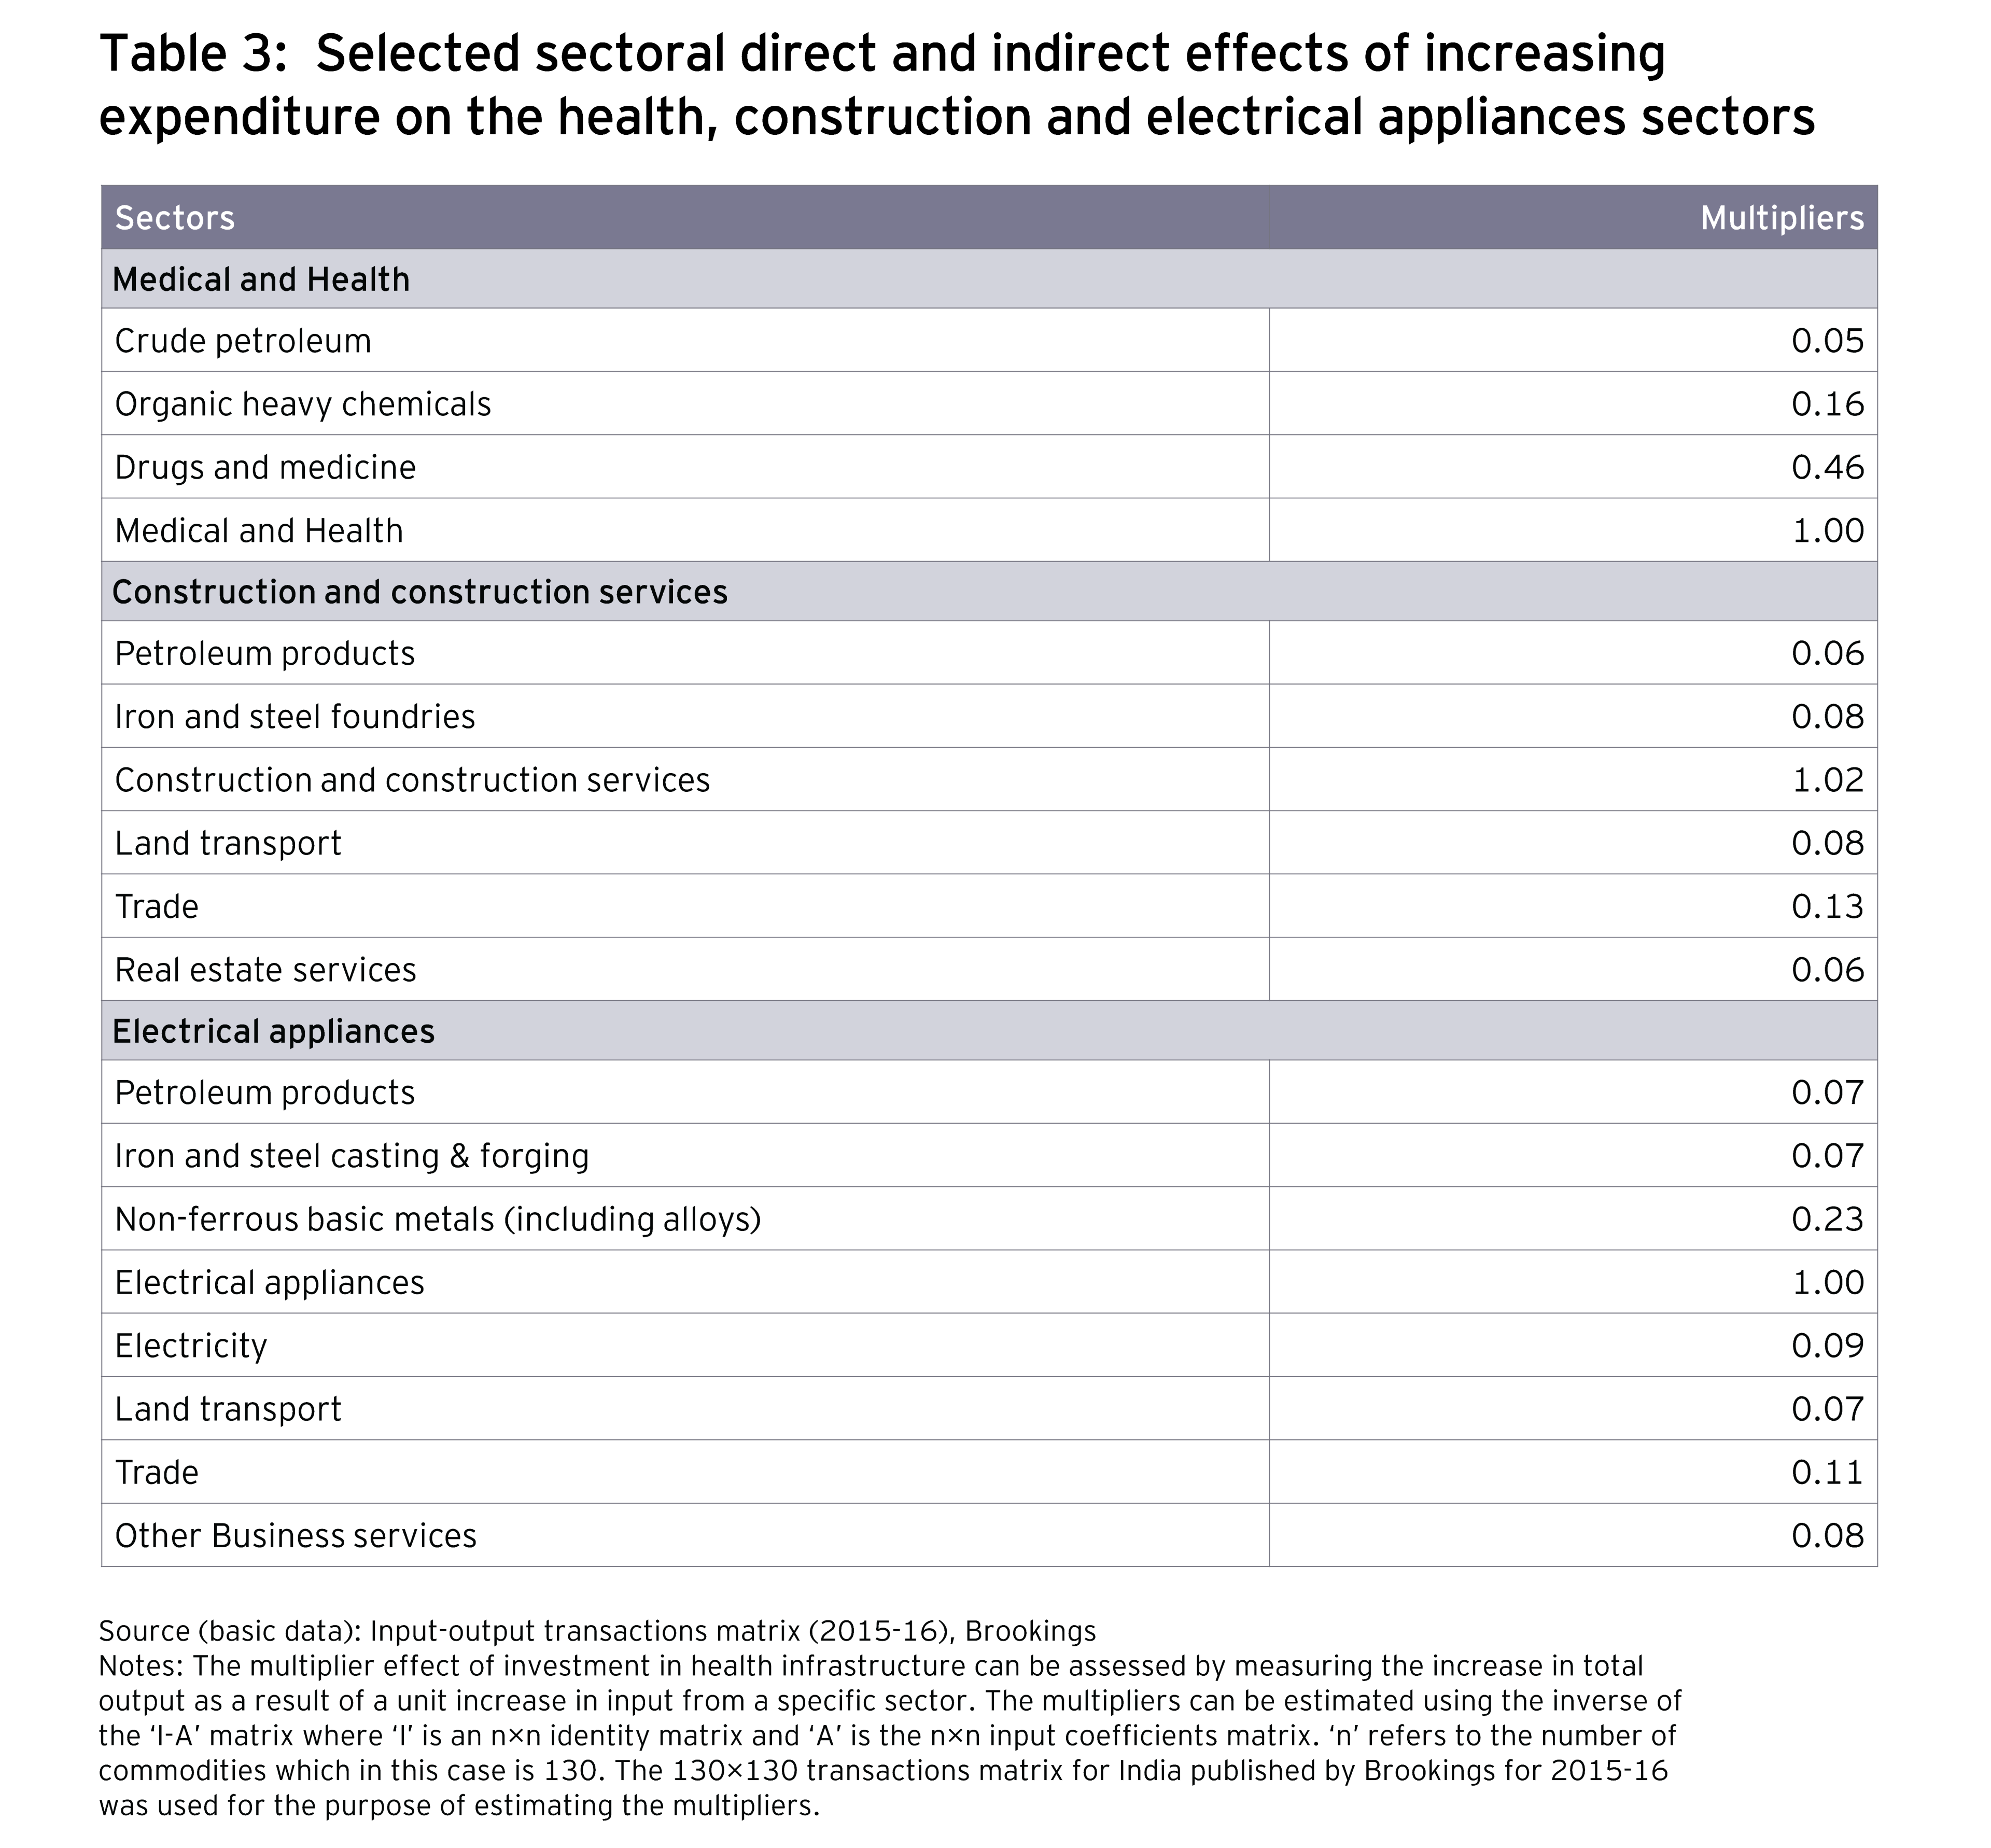 Sectoral direct and indirect effects of increasing expenditure on the health, construction and electrical appliances sectors